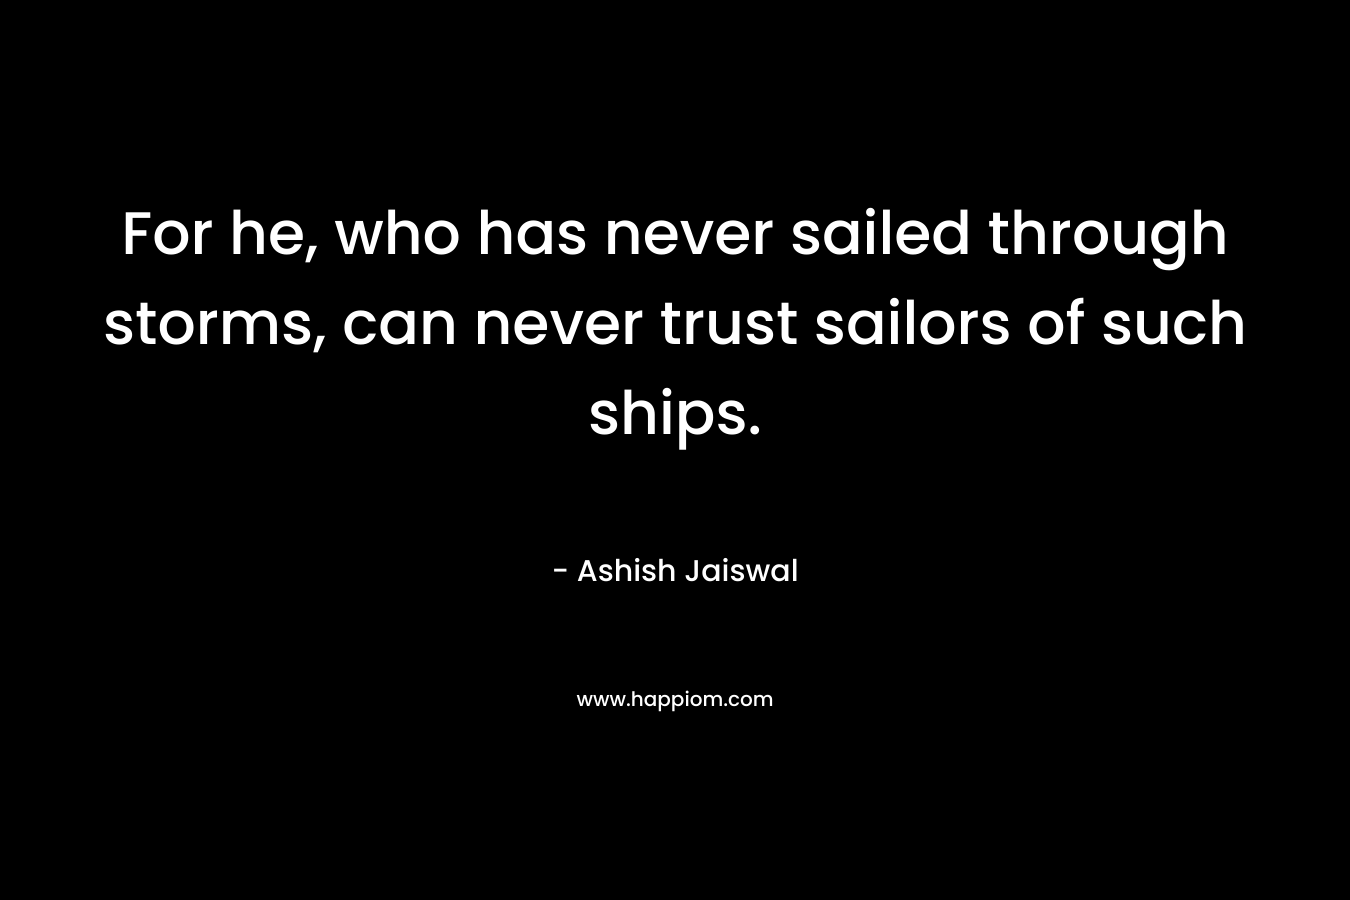 For he, who has never sailed through storms, can never trust sailors of such ships.